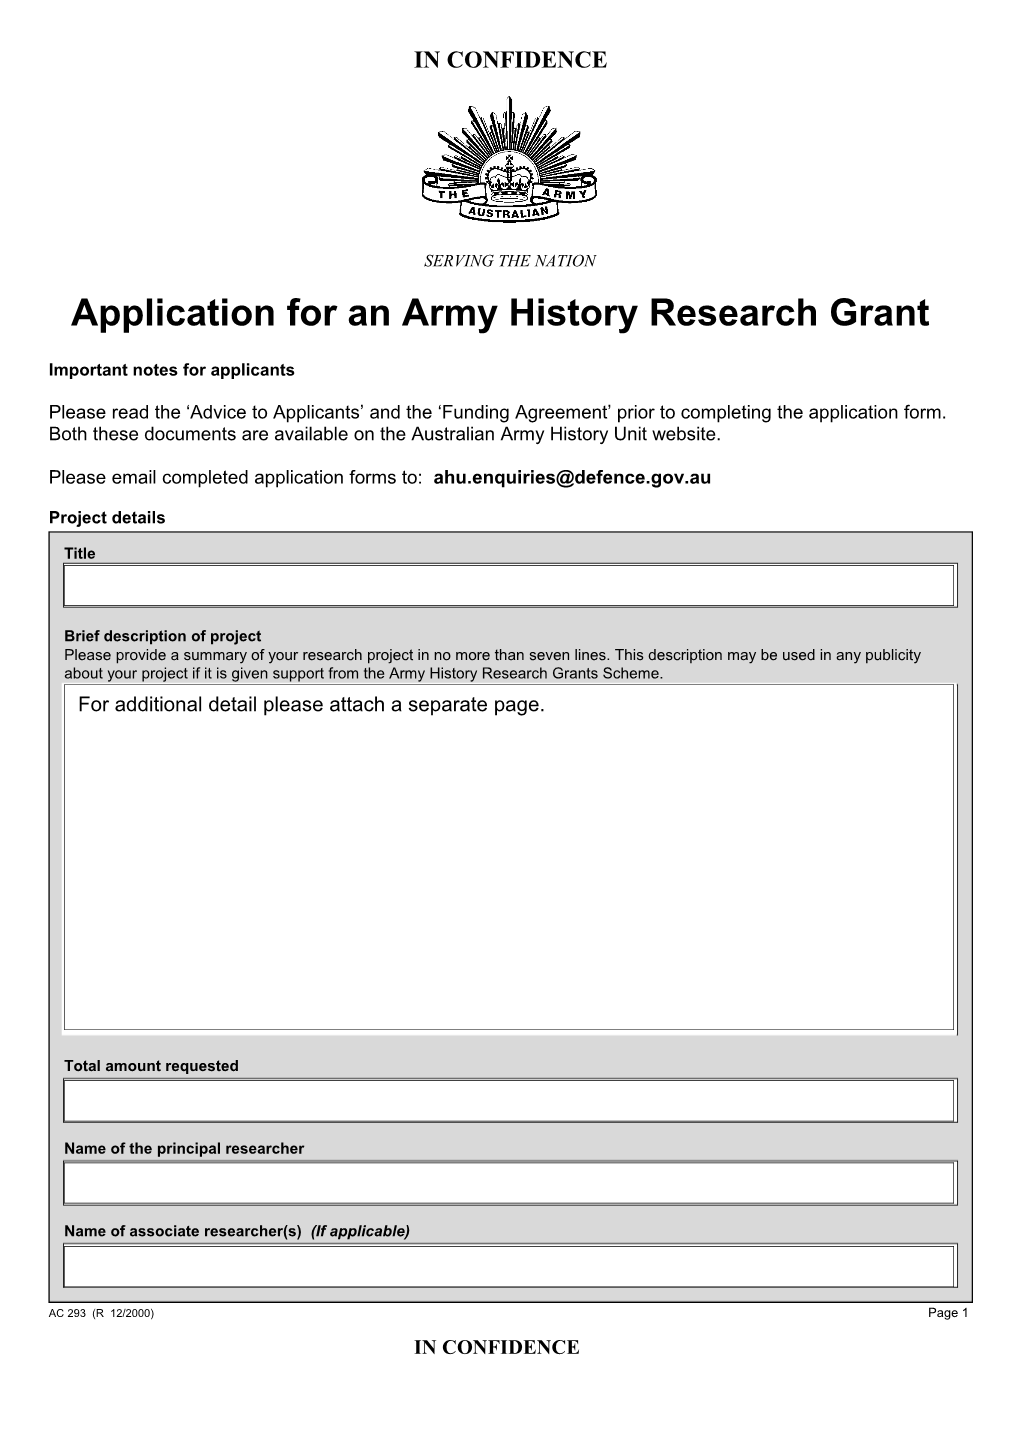 Application for an Army History Research Grant